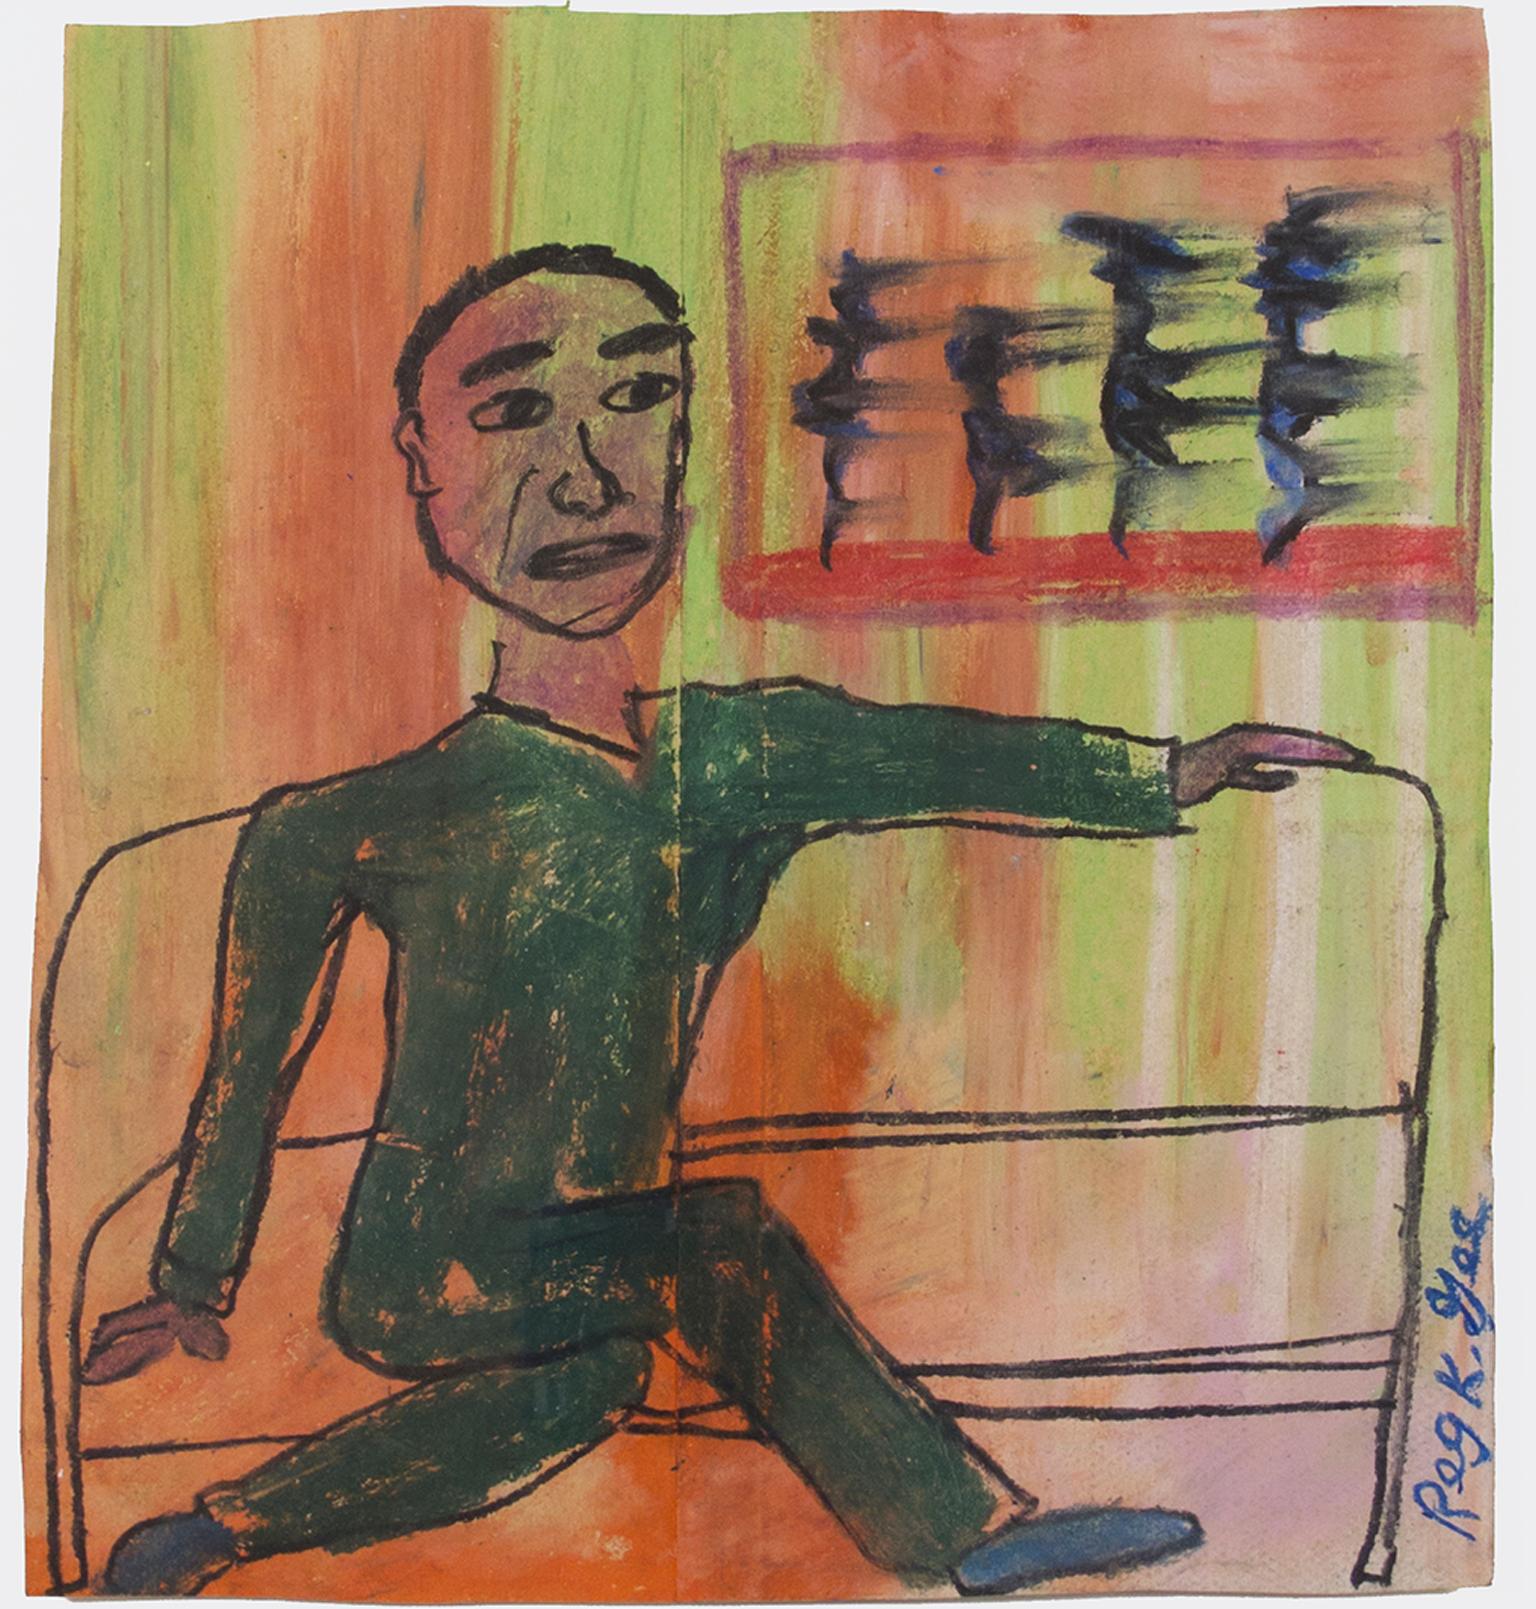 "Man on Express, " Oil Pastel Drawing on Grocery Bag signed by Reginald K. Gee